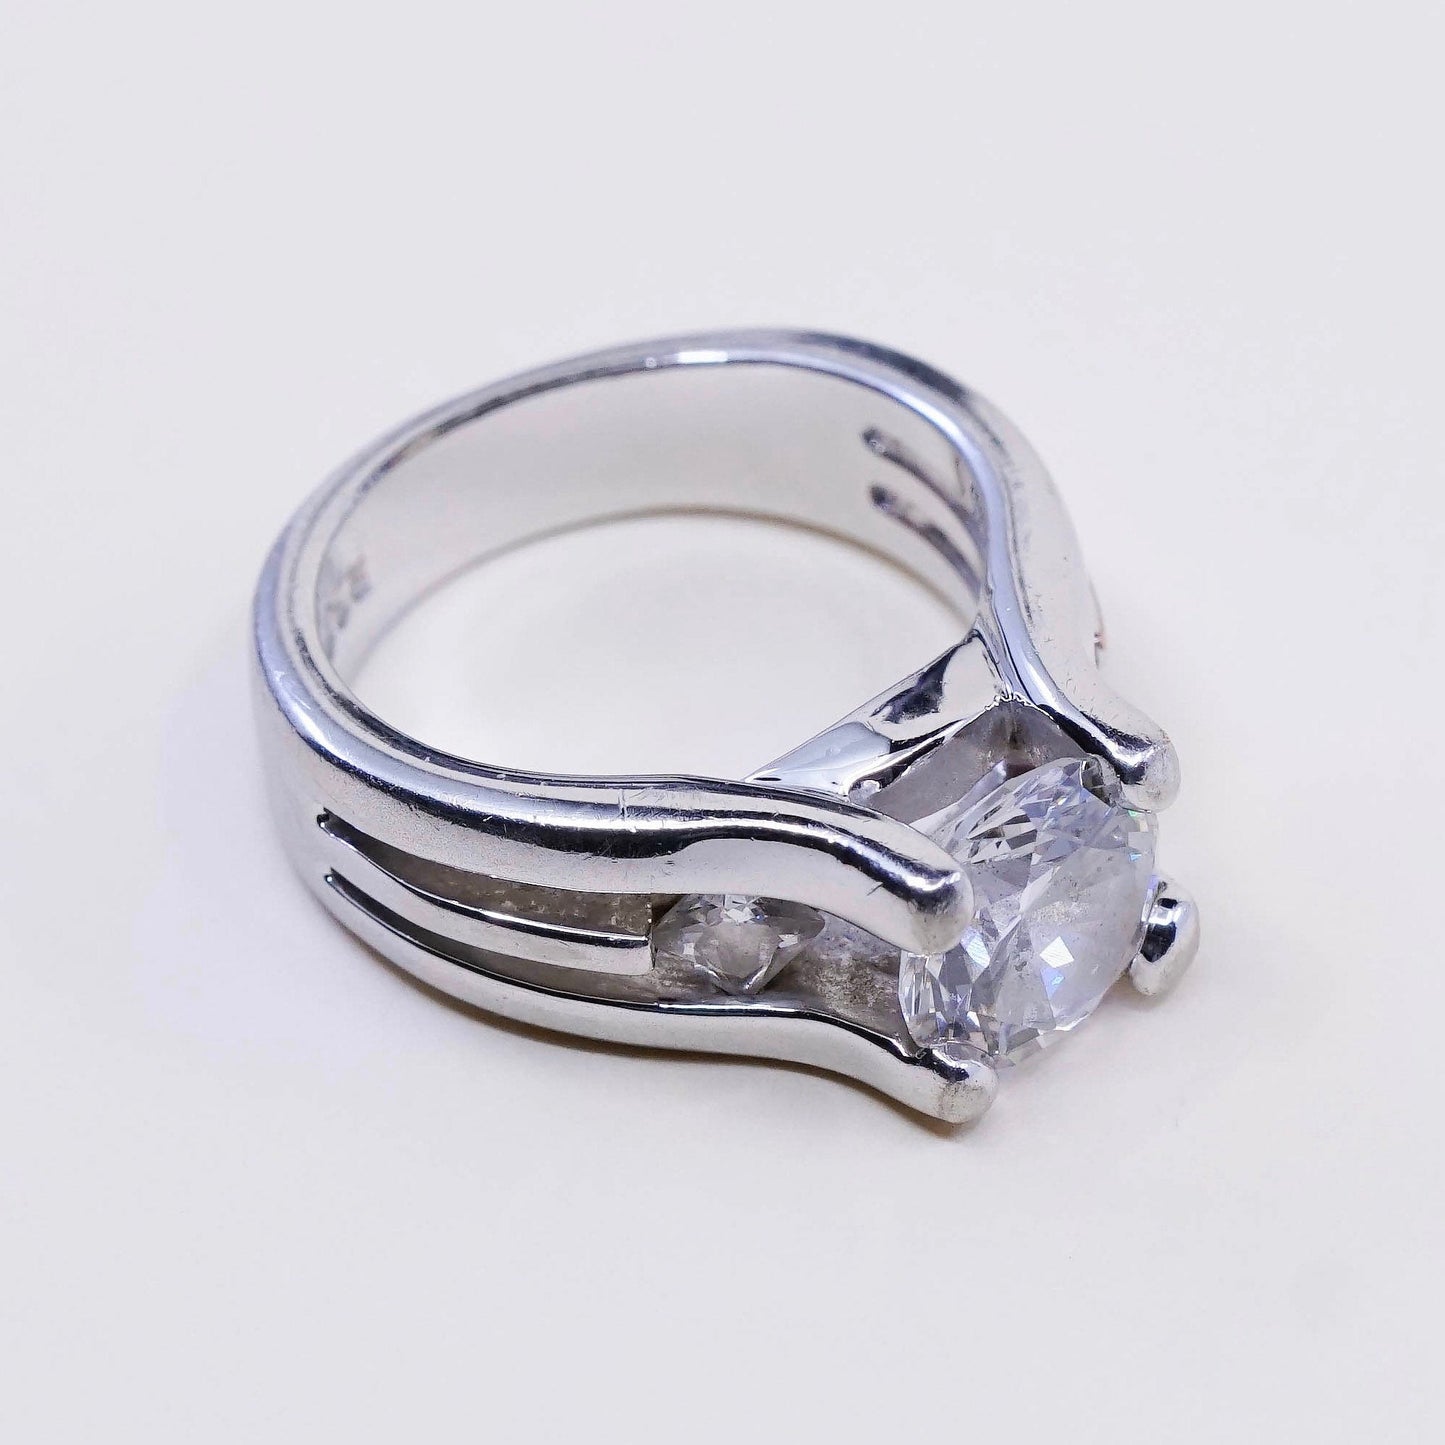 Size 5, Sterling silver ring, 925 silver with round cut CZ cluster